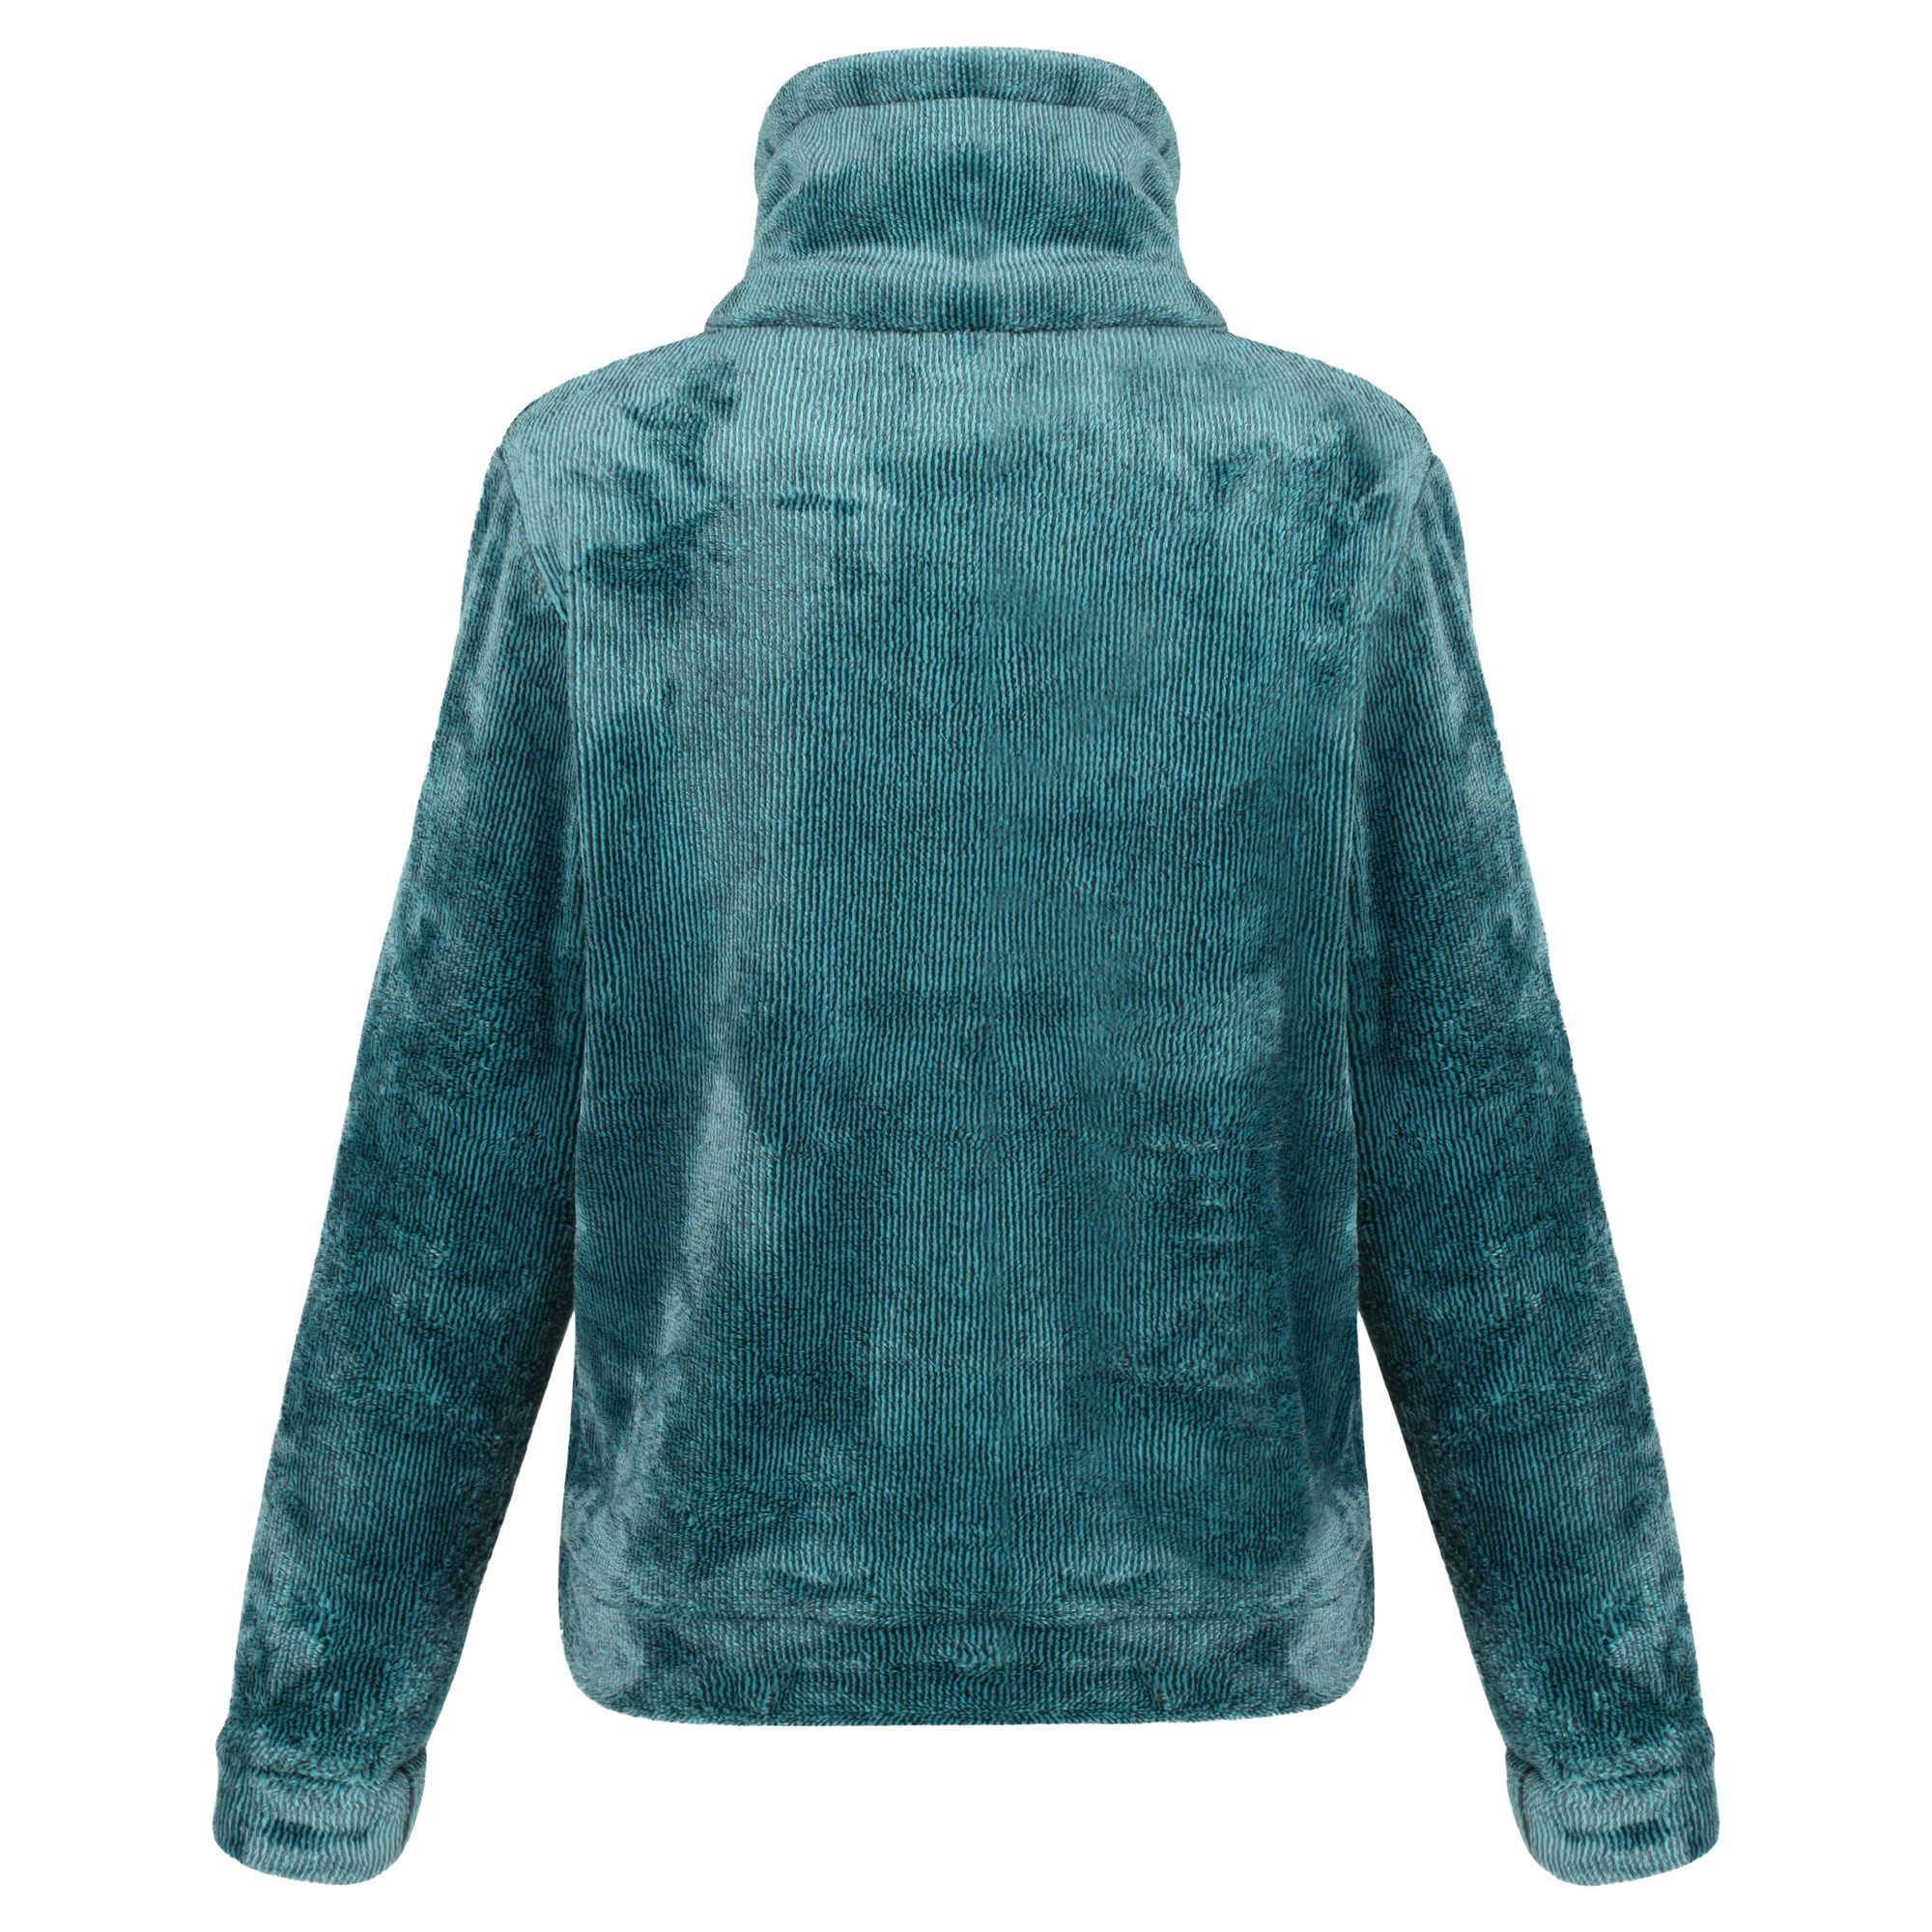 100% polyester two tone fluffy fleece. Cut hip length with raglan sleeves. Zip neck. 2 zipped lower pockets.